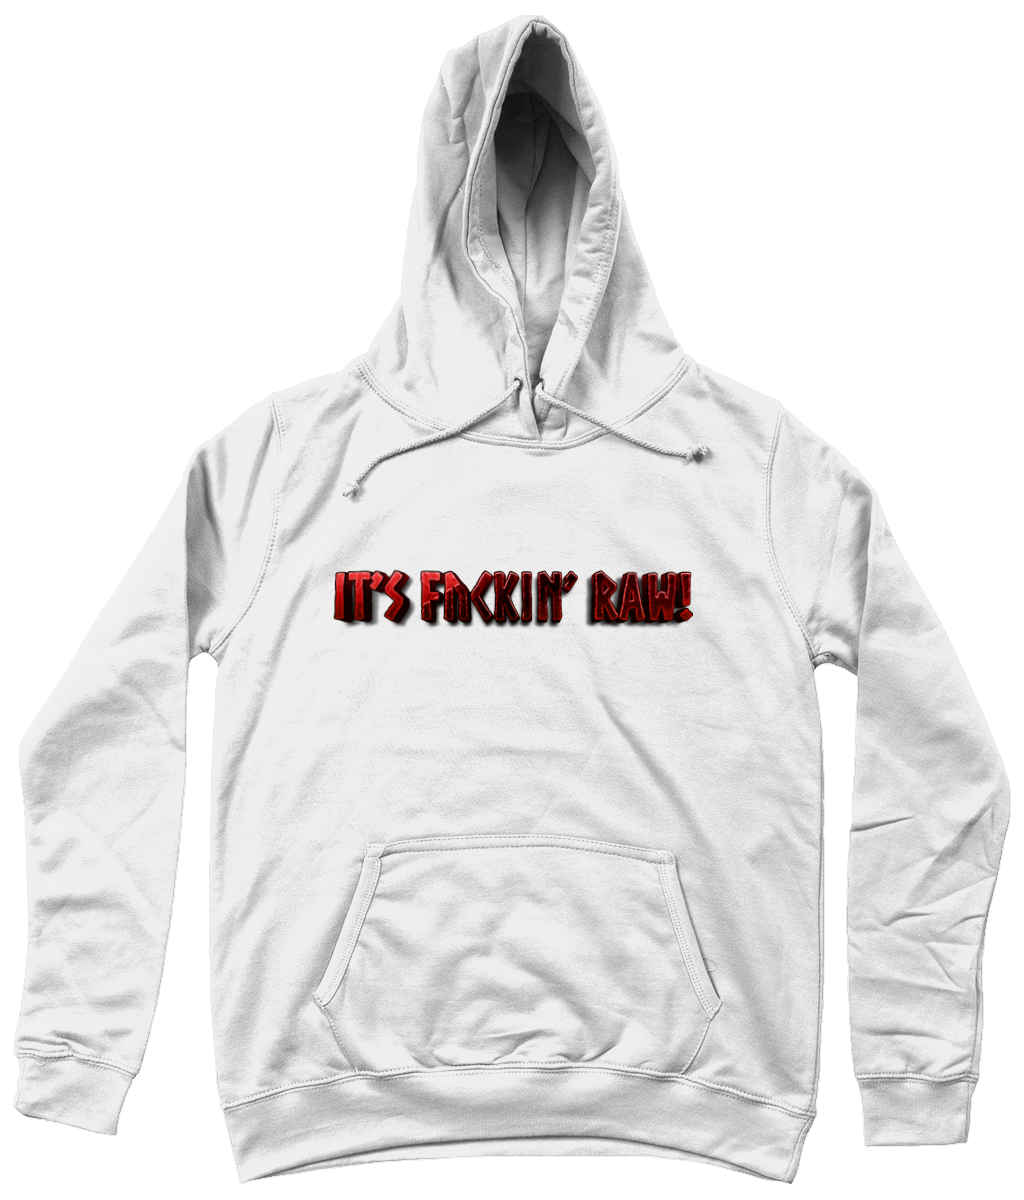 Raw47 It's ** RAW! Girlie Fit College Hoodie